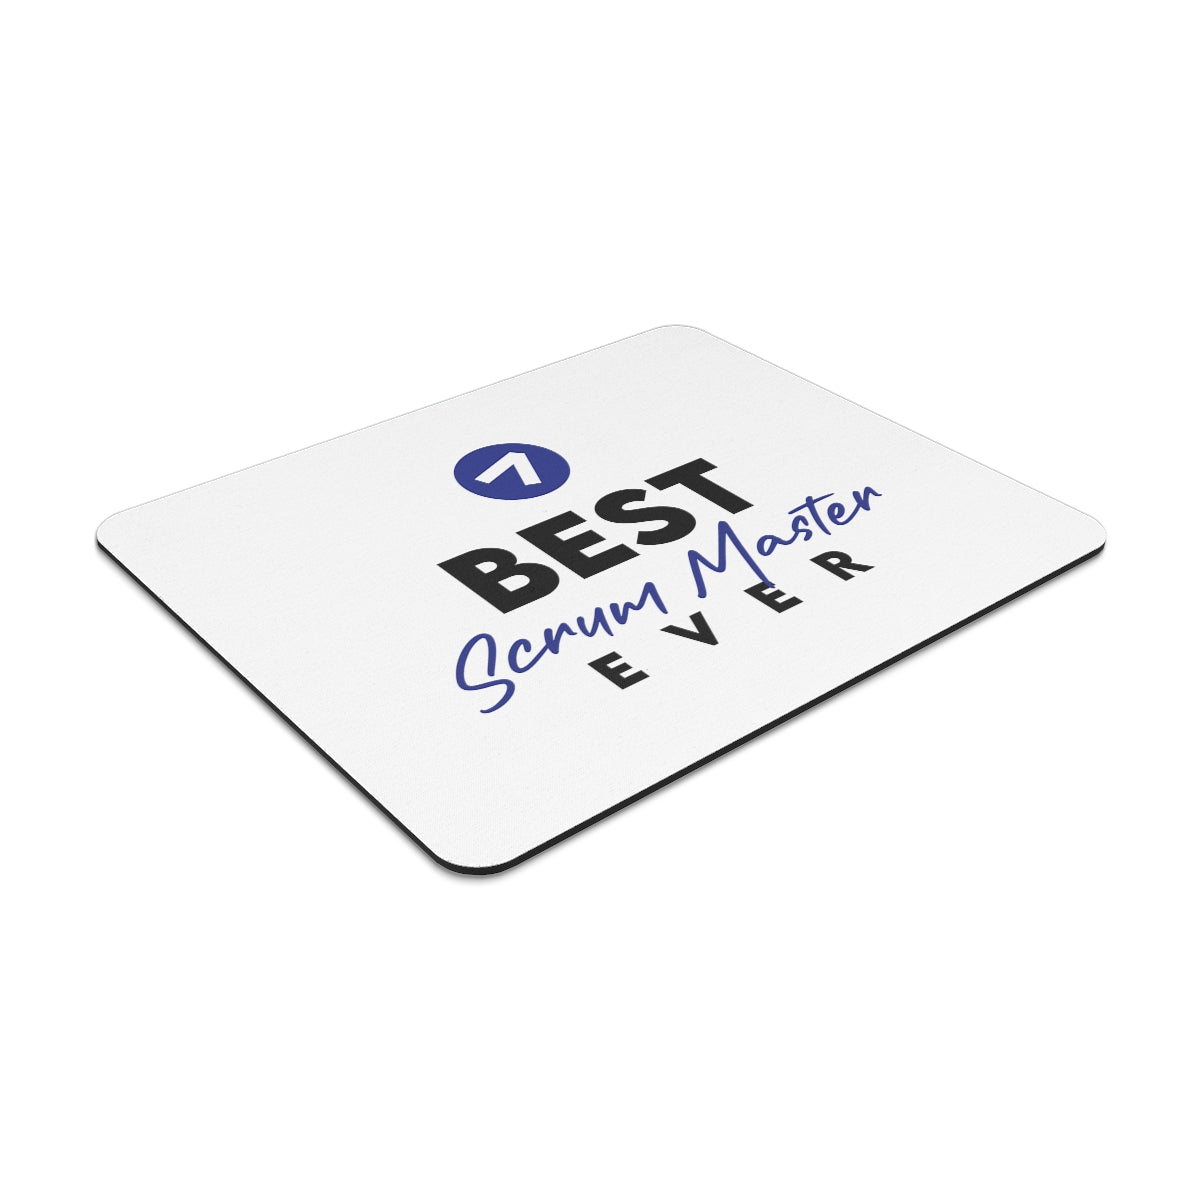 Best Scrum Master ever - Dark Blue - Mouse Pad (3mm Thick)